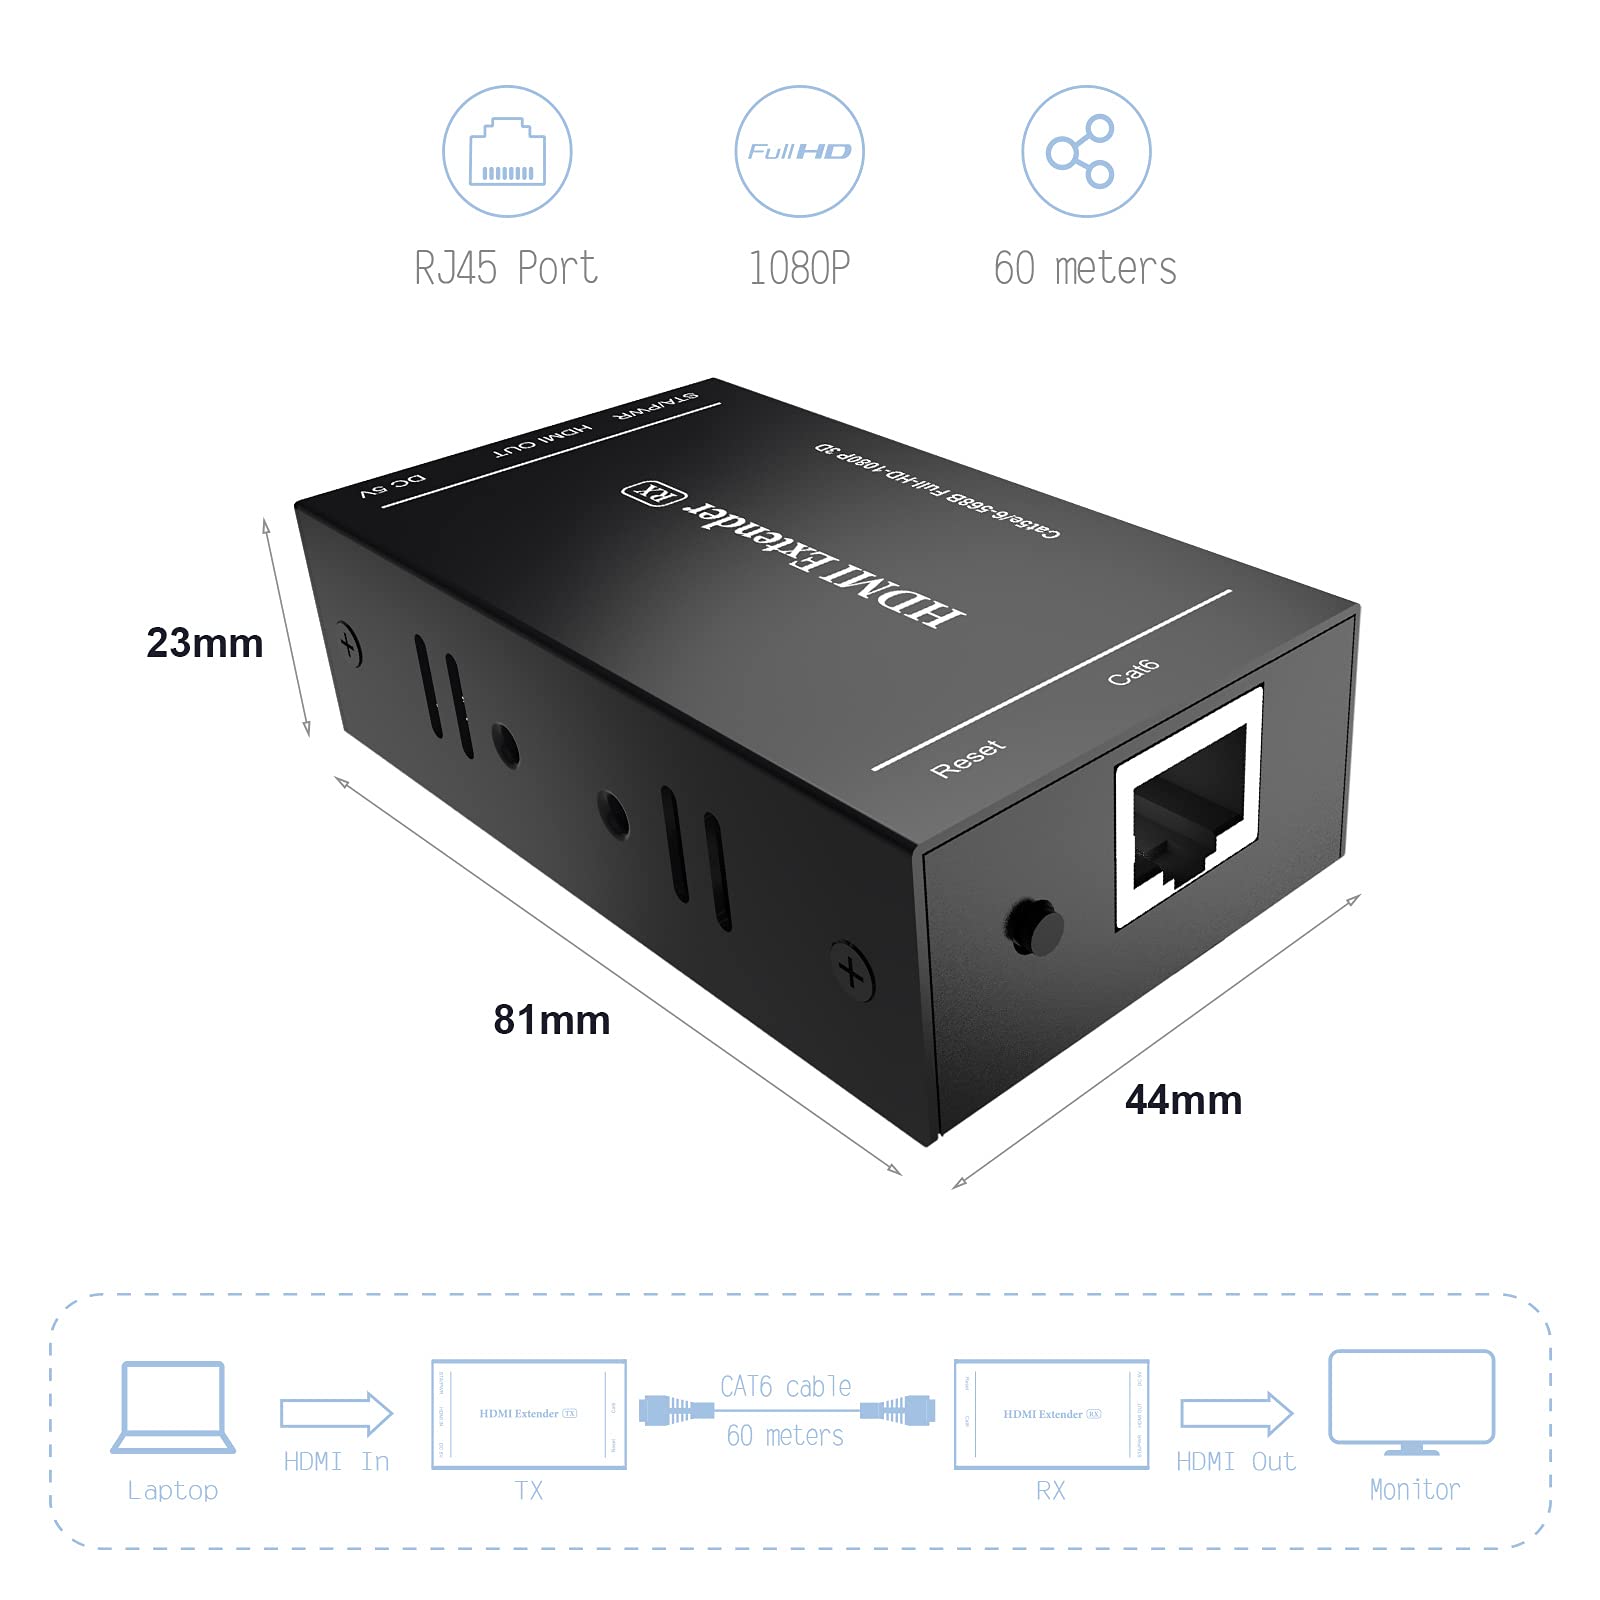 Rybozen Digital HDMI Extender, by Single CAT6/CAT7 Cable Full HD Uncompressed Transmit Up to 196 Ft(60m), Support 1080p@60Hz, 3D Signal, EDID Copy, Deep Color（Transmitter and Receiver）